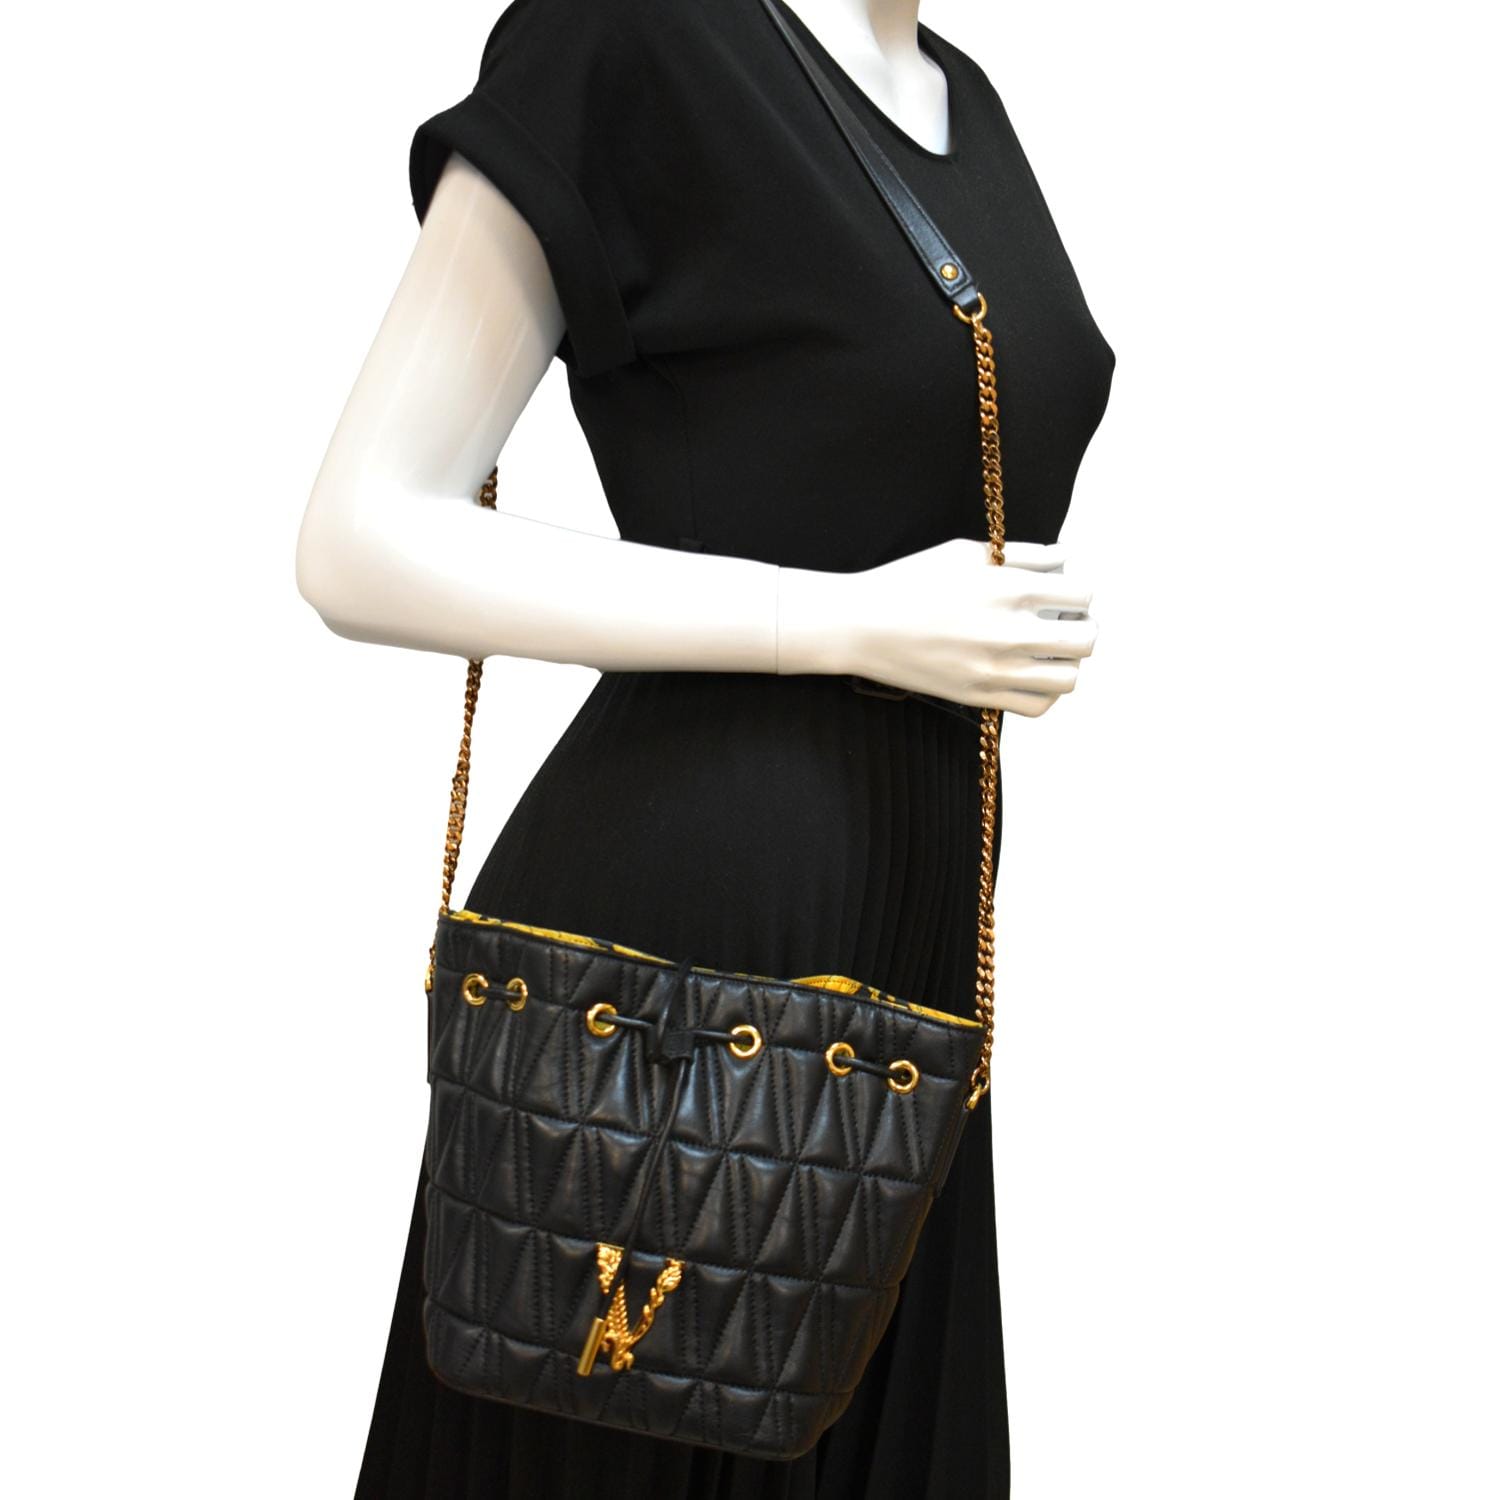 Virtus quilted leather crossbody bag in black - Versace